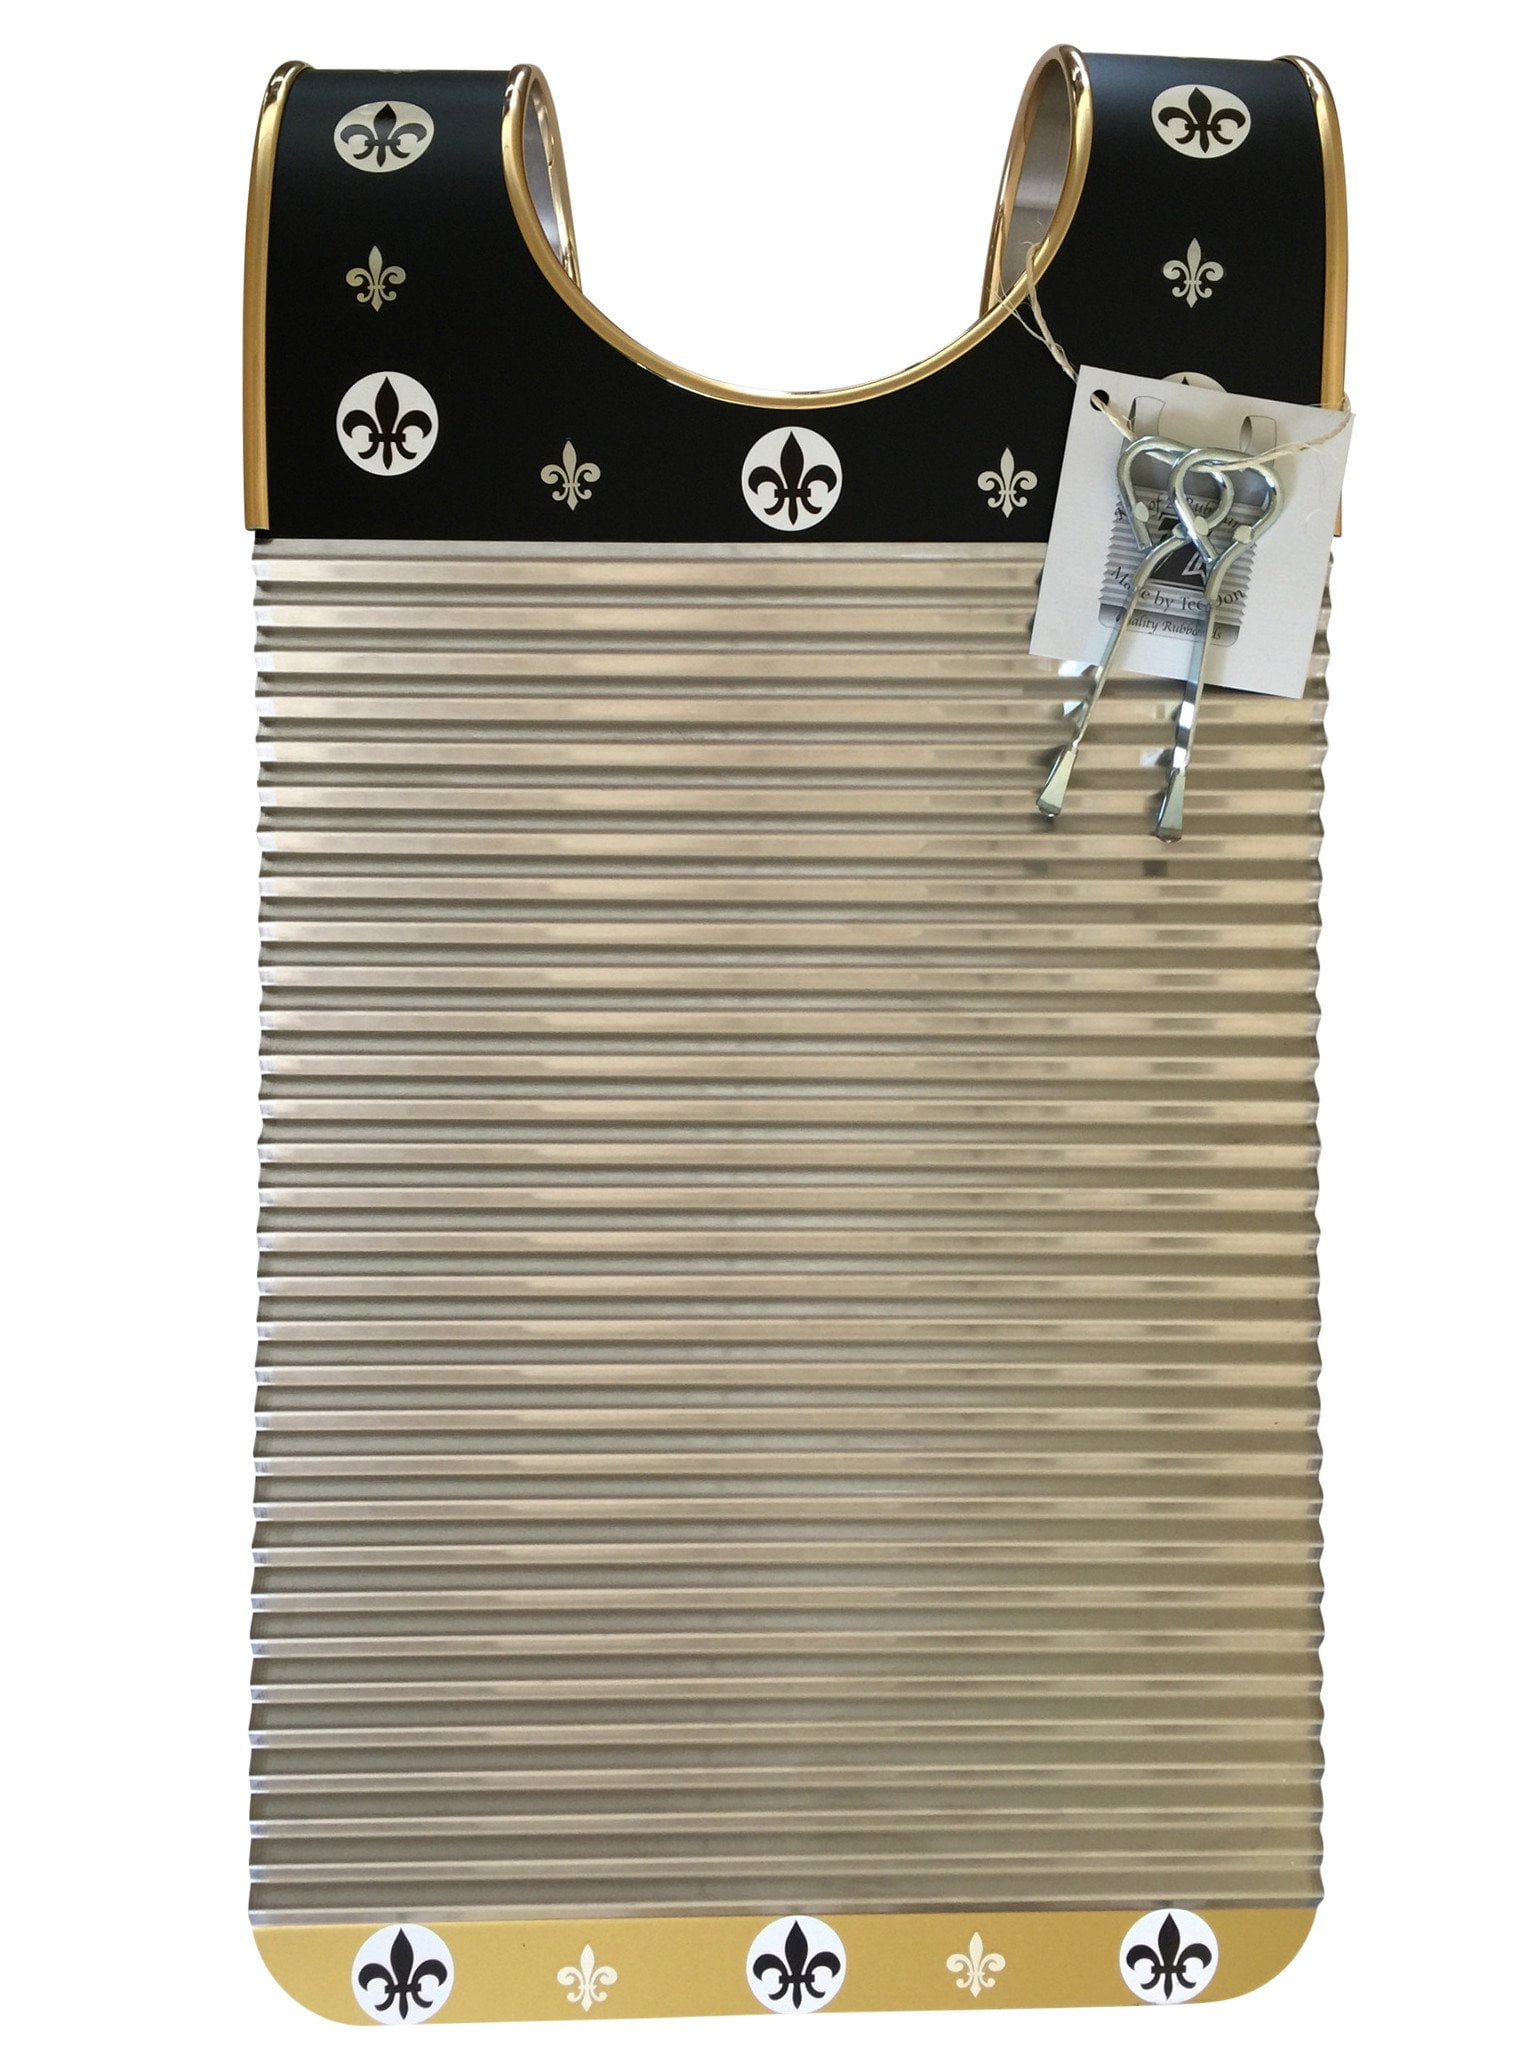 Washboard Zydeco Rubboard Musical Instrument Free Scratchers StainlessSteel Mini 